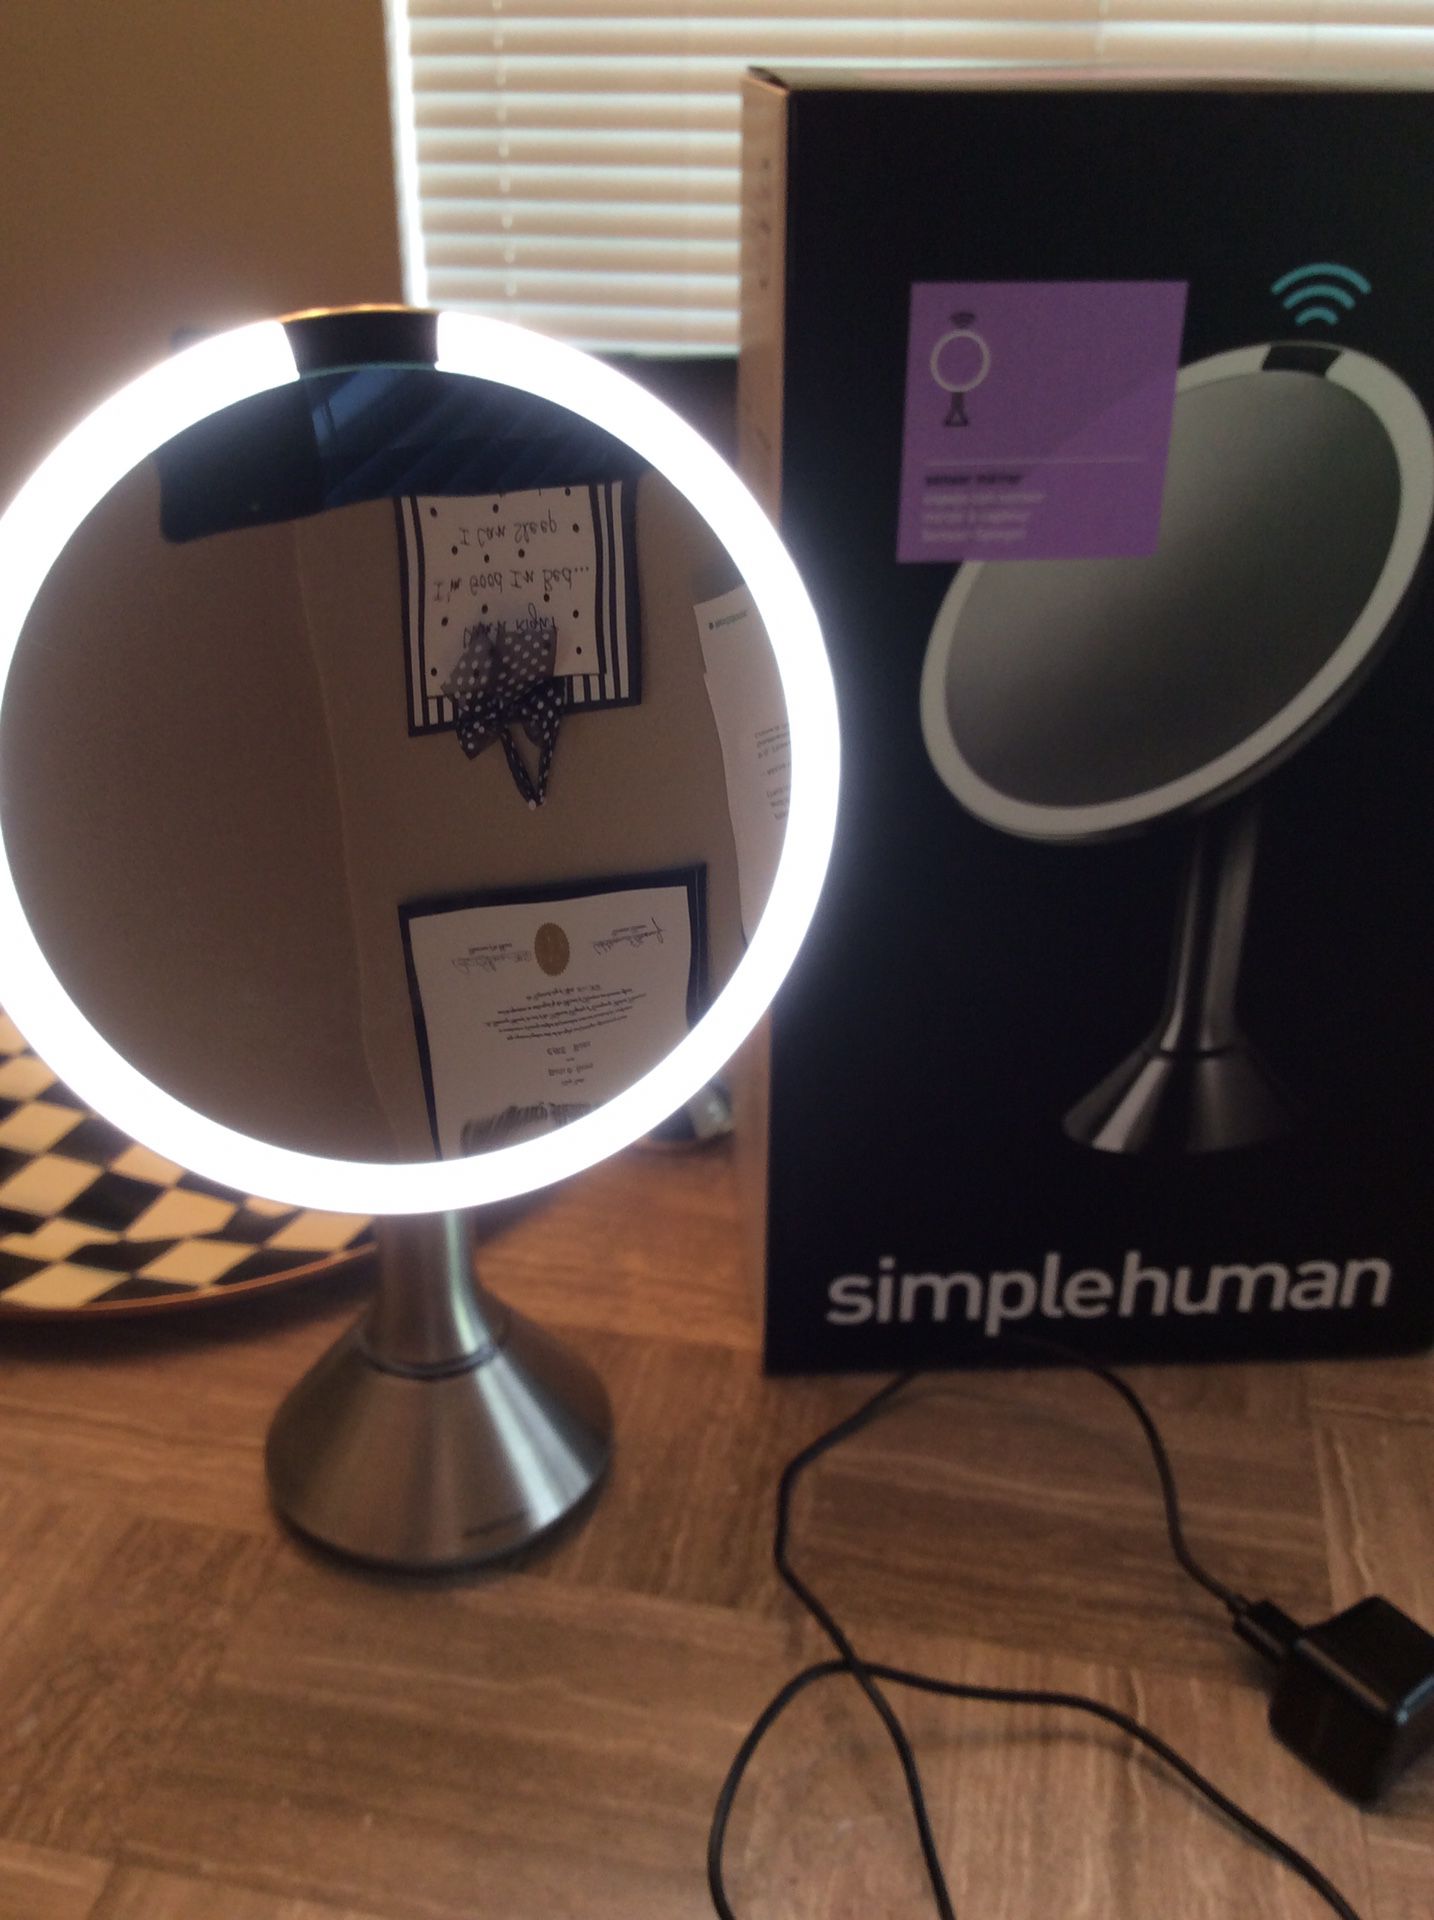 SIMPLEHUMAN tru-lux light system, sensor makeup 5x magnifying Mirror ,vanity ,beauty tool stainless color, with box.